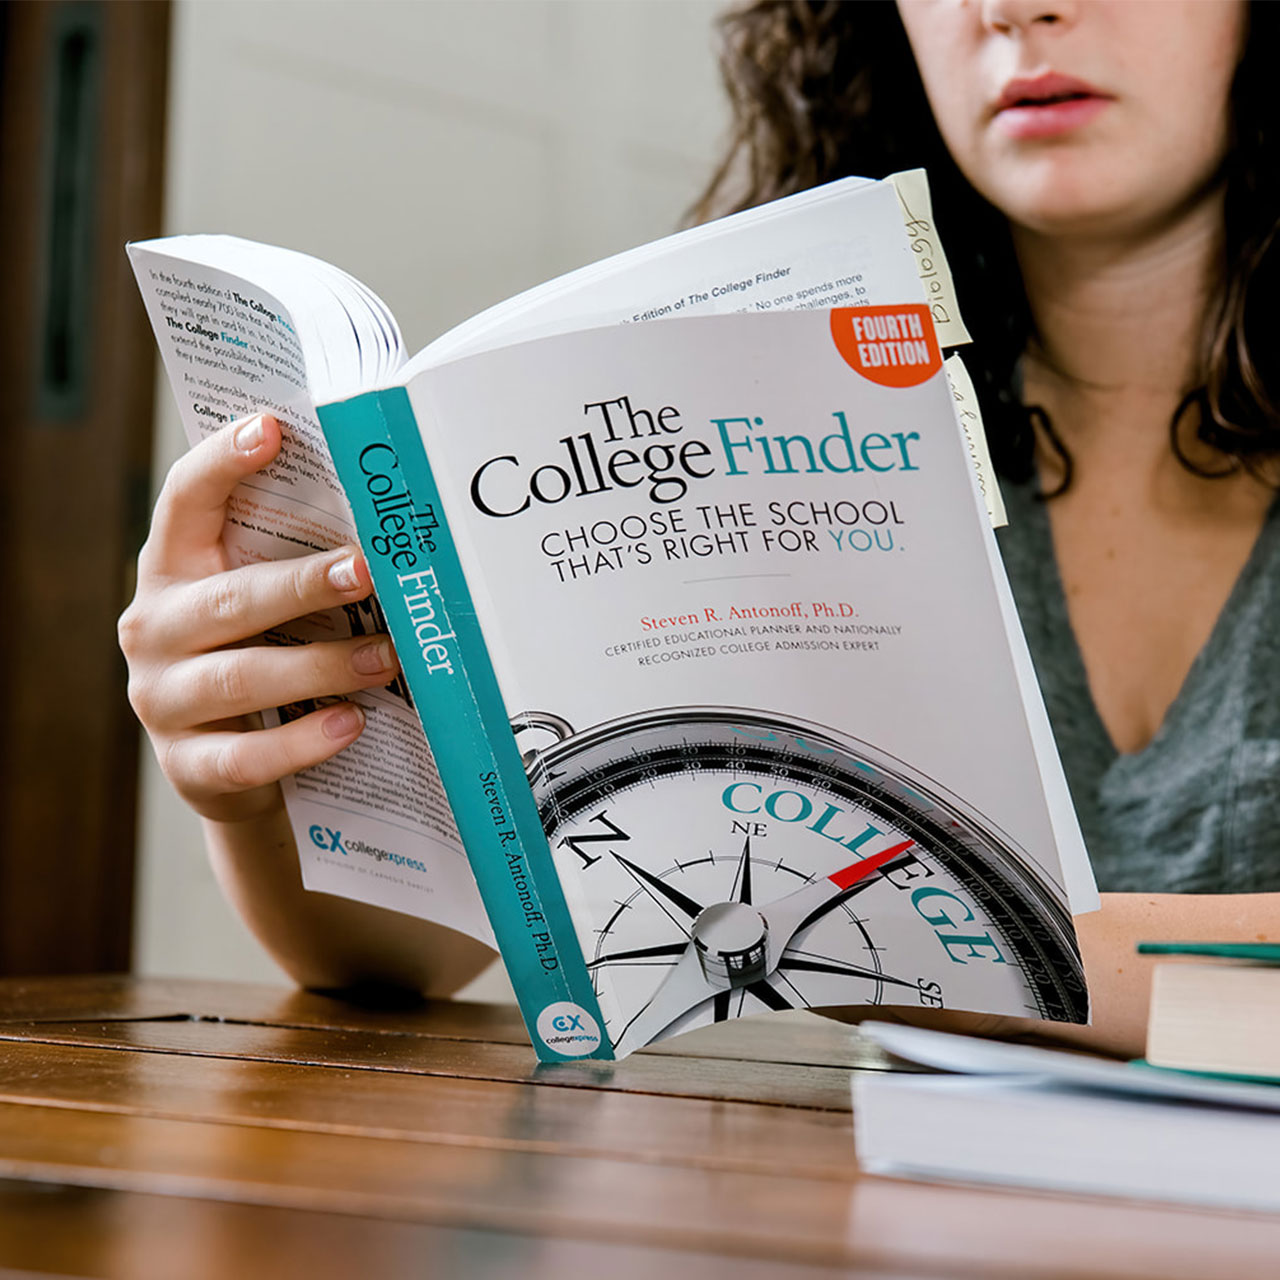 Student Reviewing a Book called, "The College Finder"